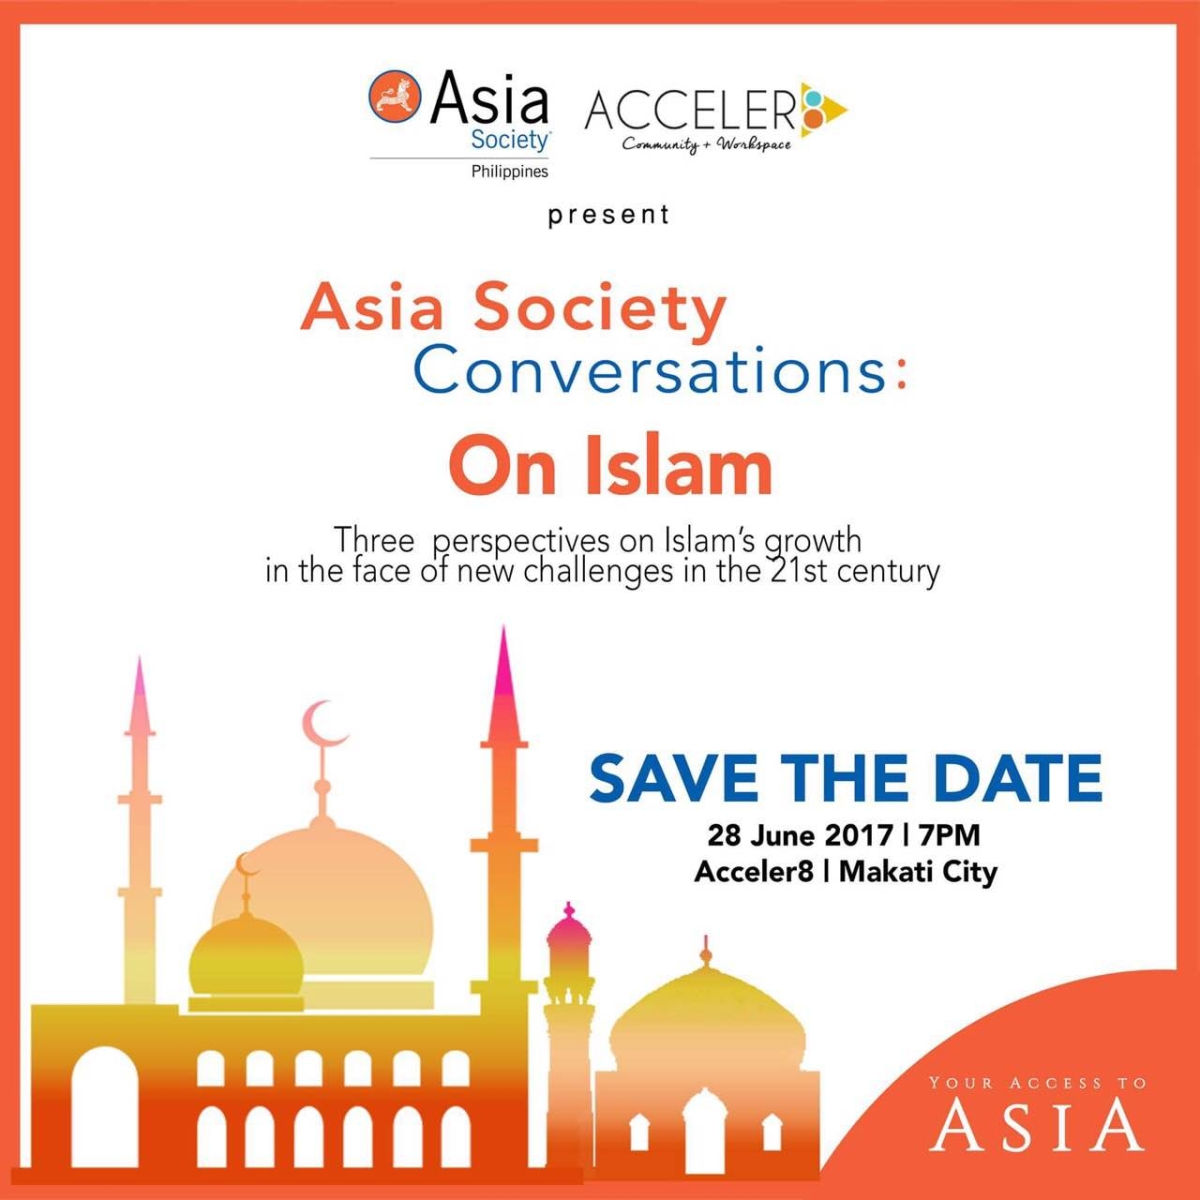 Asia Society Conversations: On Islam, 28 June 2017, 7-9 PM, Acceler8